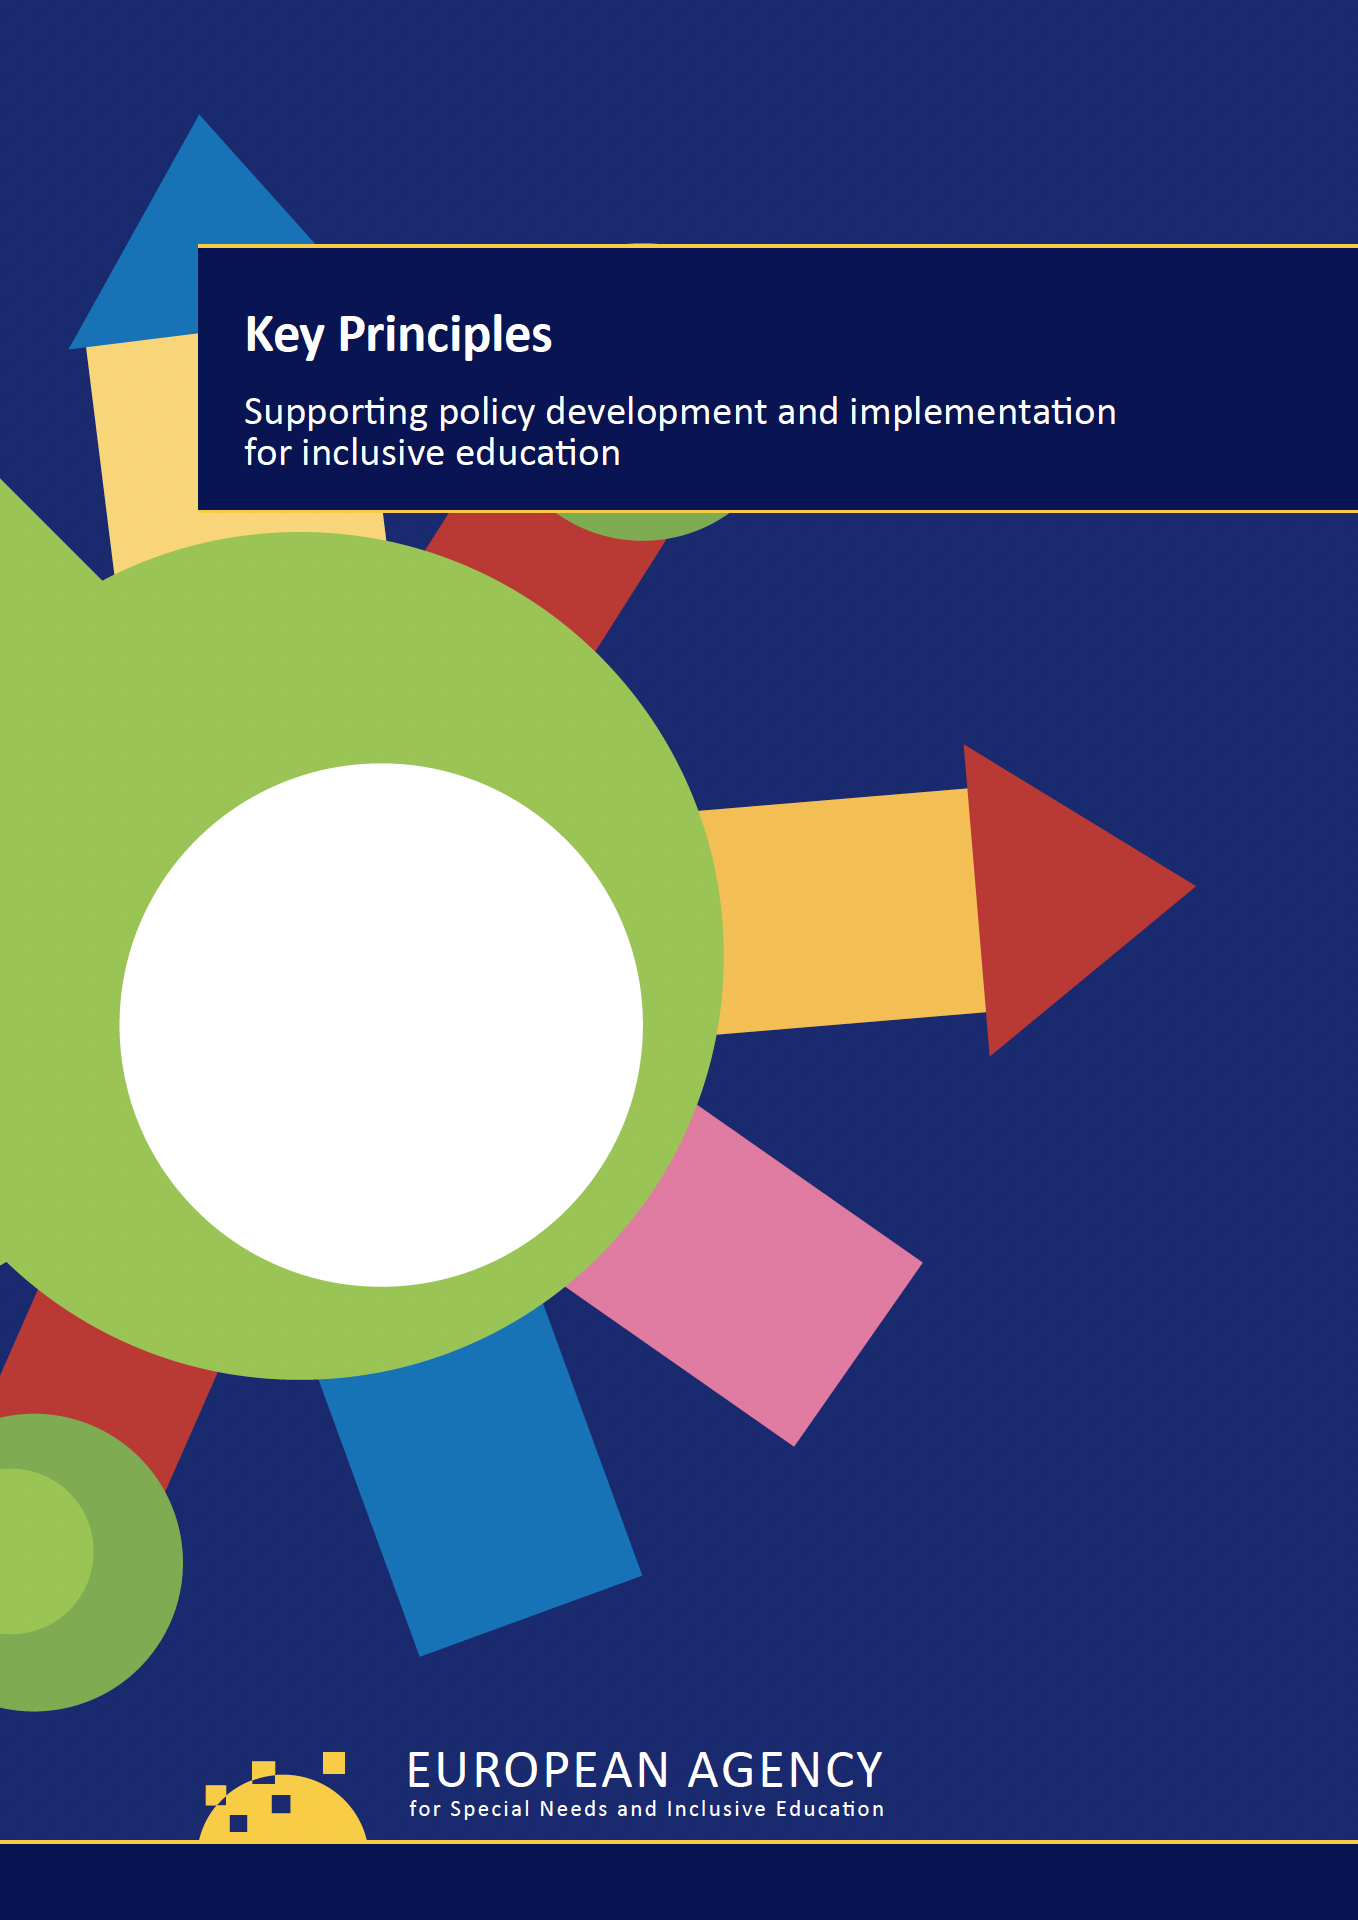 Key Principles – Supporting policy development and implementation for inclusive education